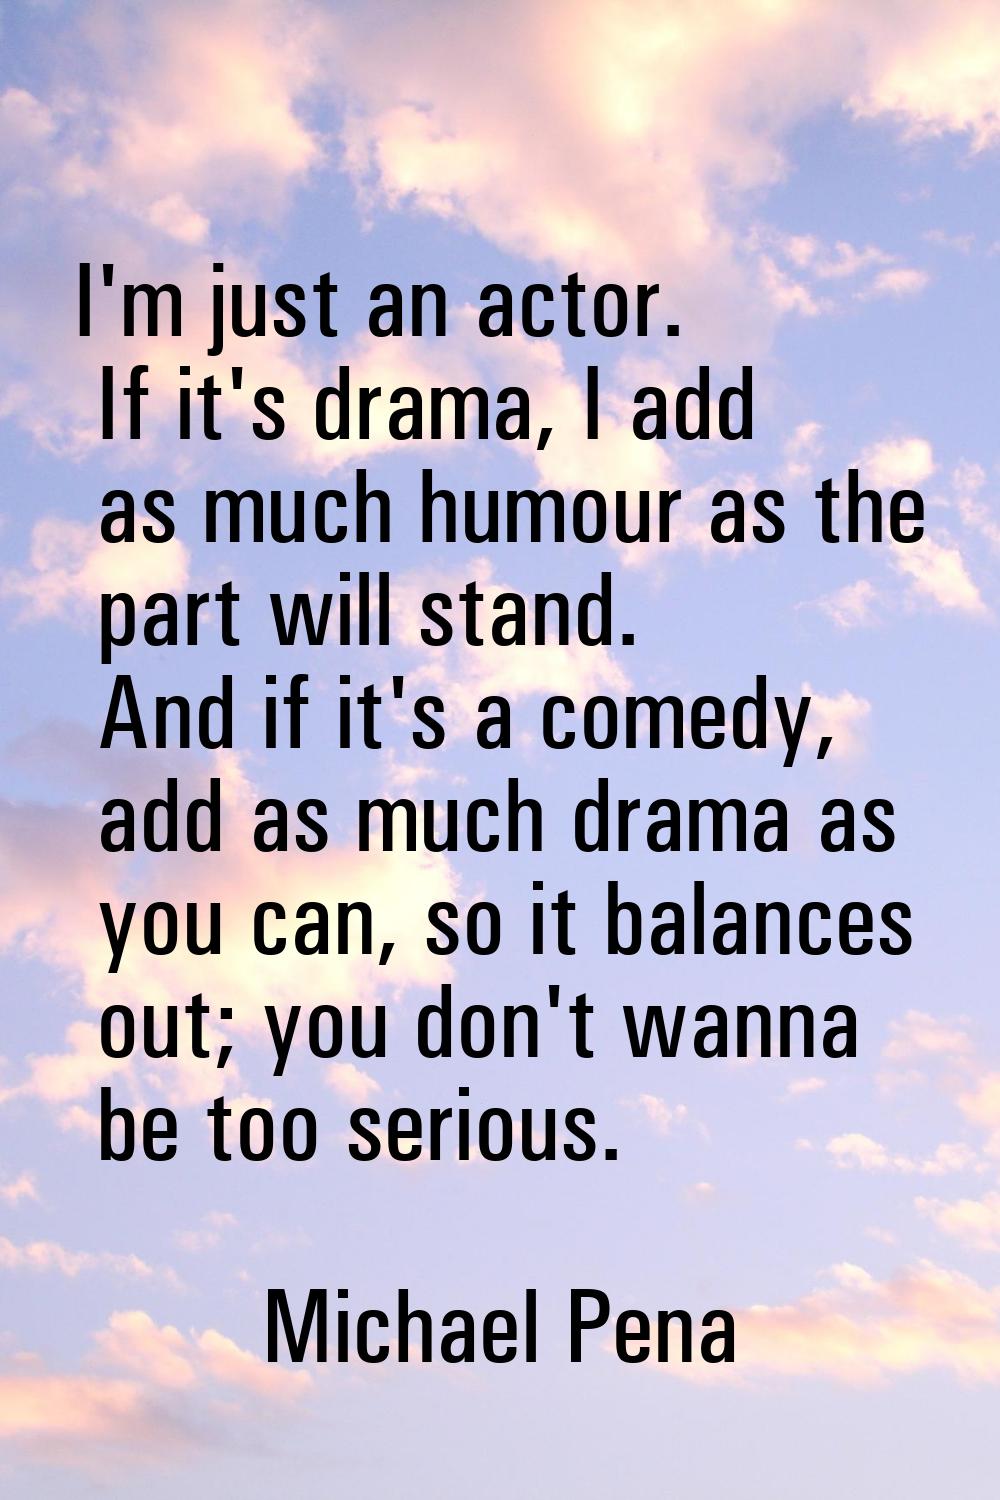 I'm just an actor. If it's drama, I add as much humour as the part will stand. And if it's a comedy